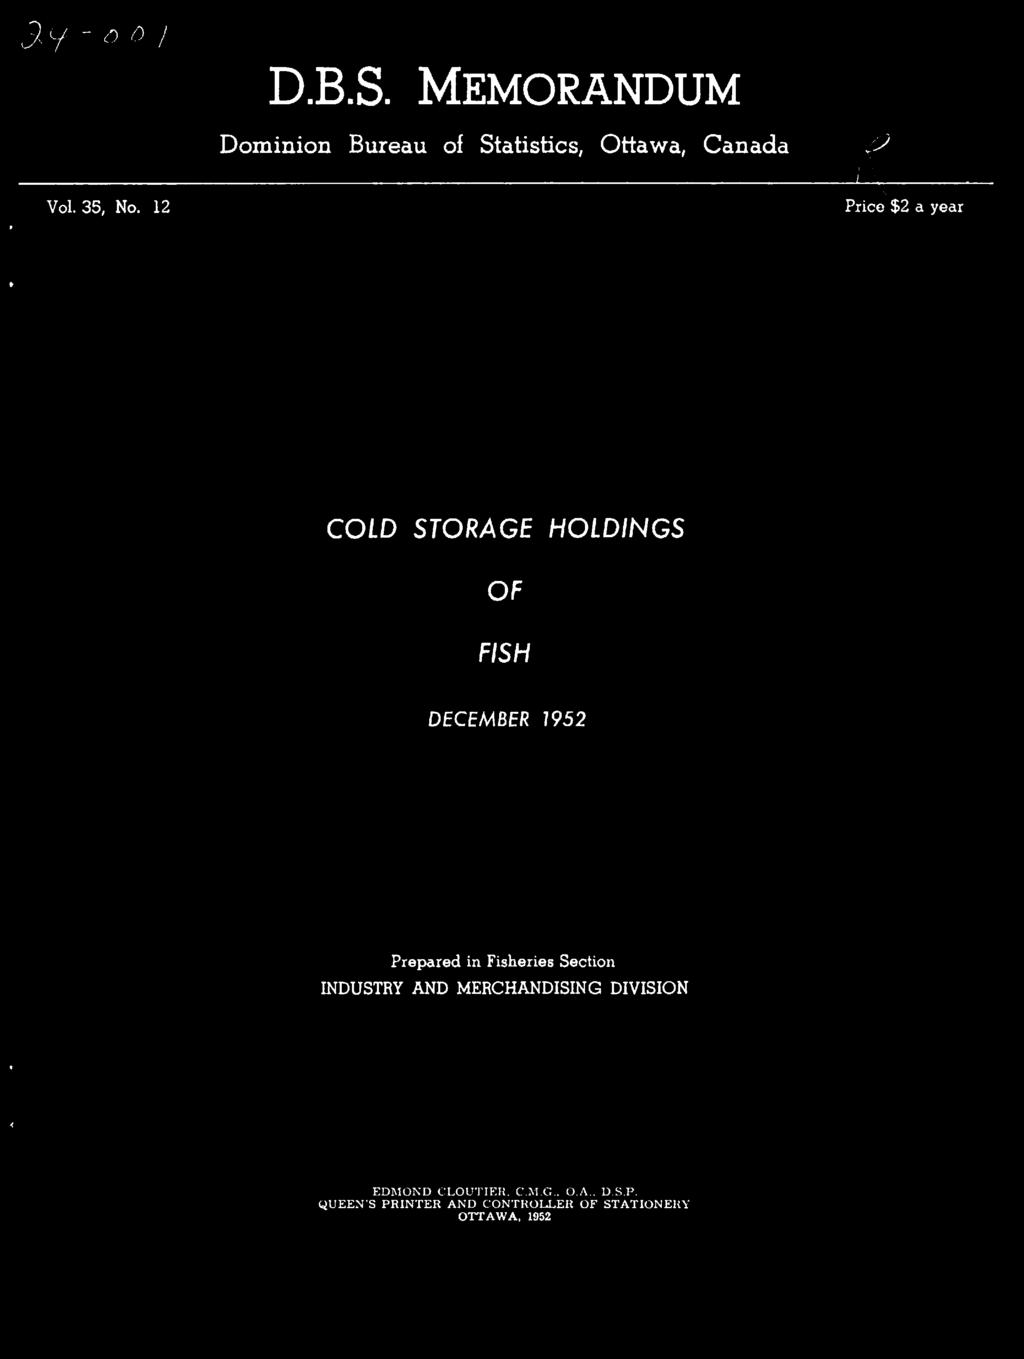 DECEMBER 1952 Prepared in Fisheries Section